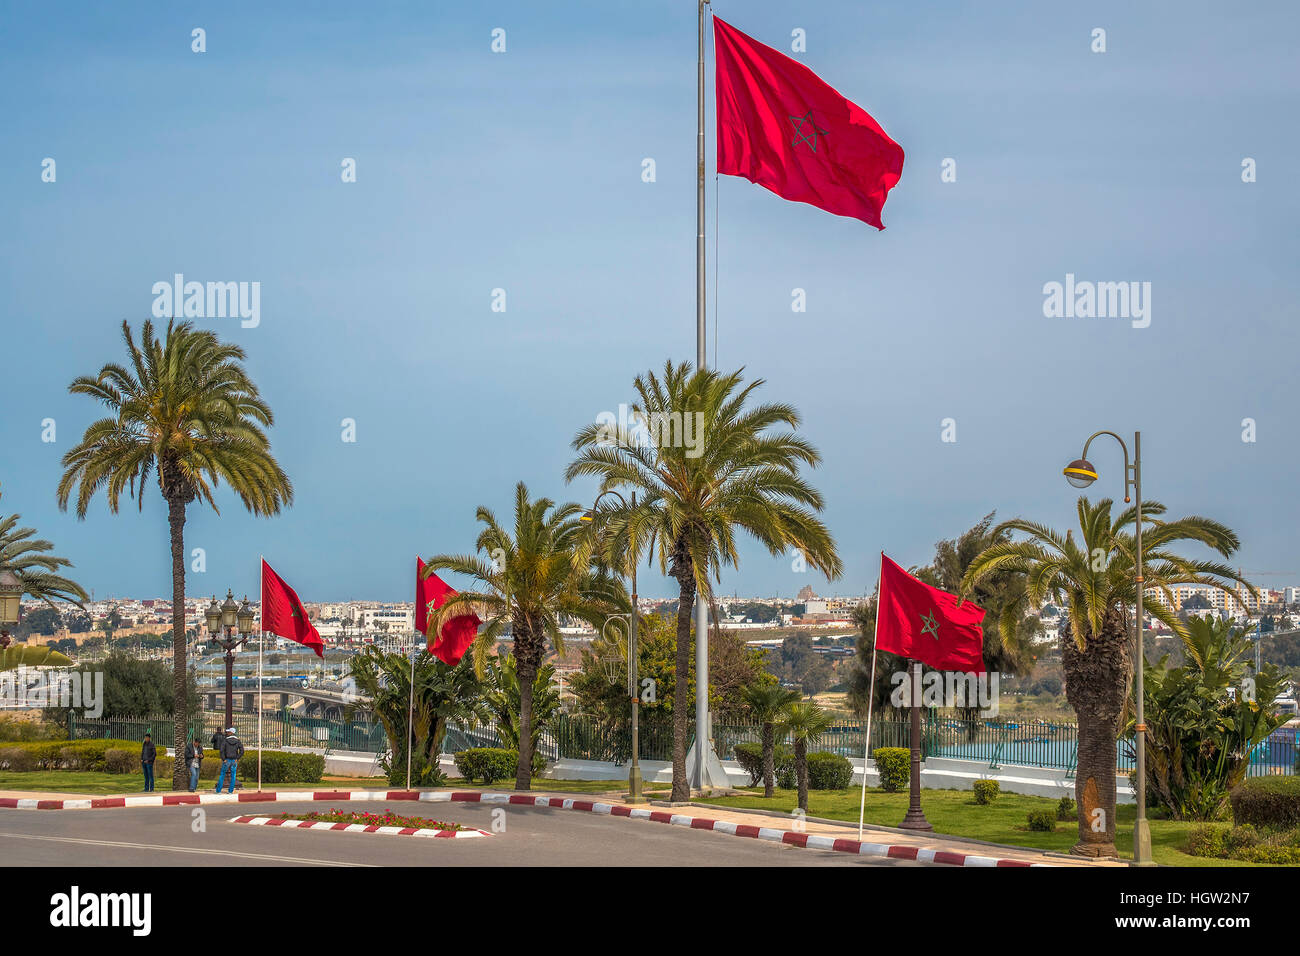 Flags Flying At The Mausoleum of Mohammed V Rabat Morocco Stock Photo